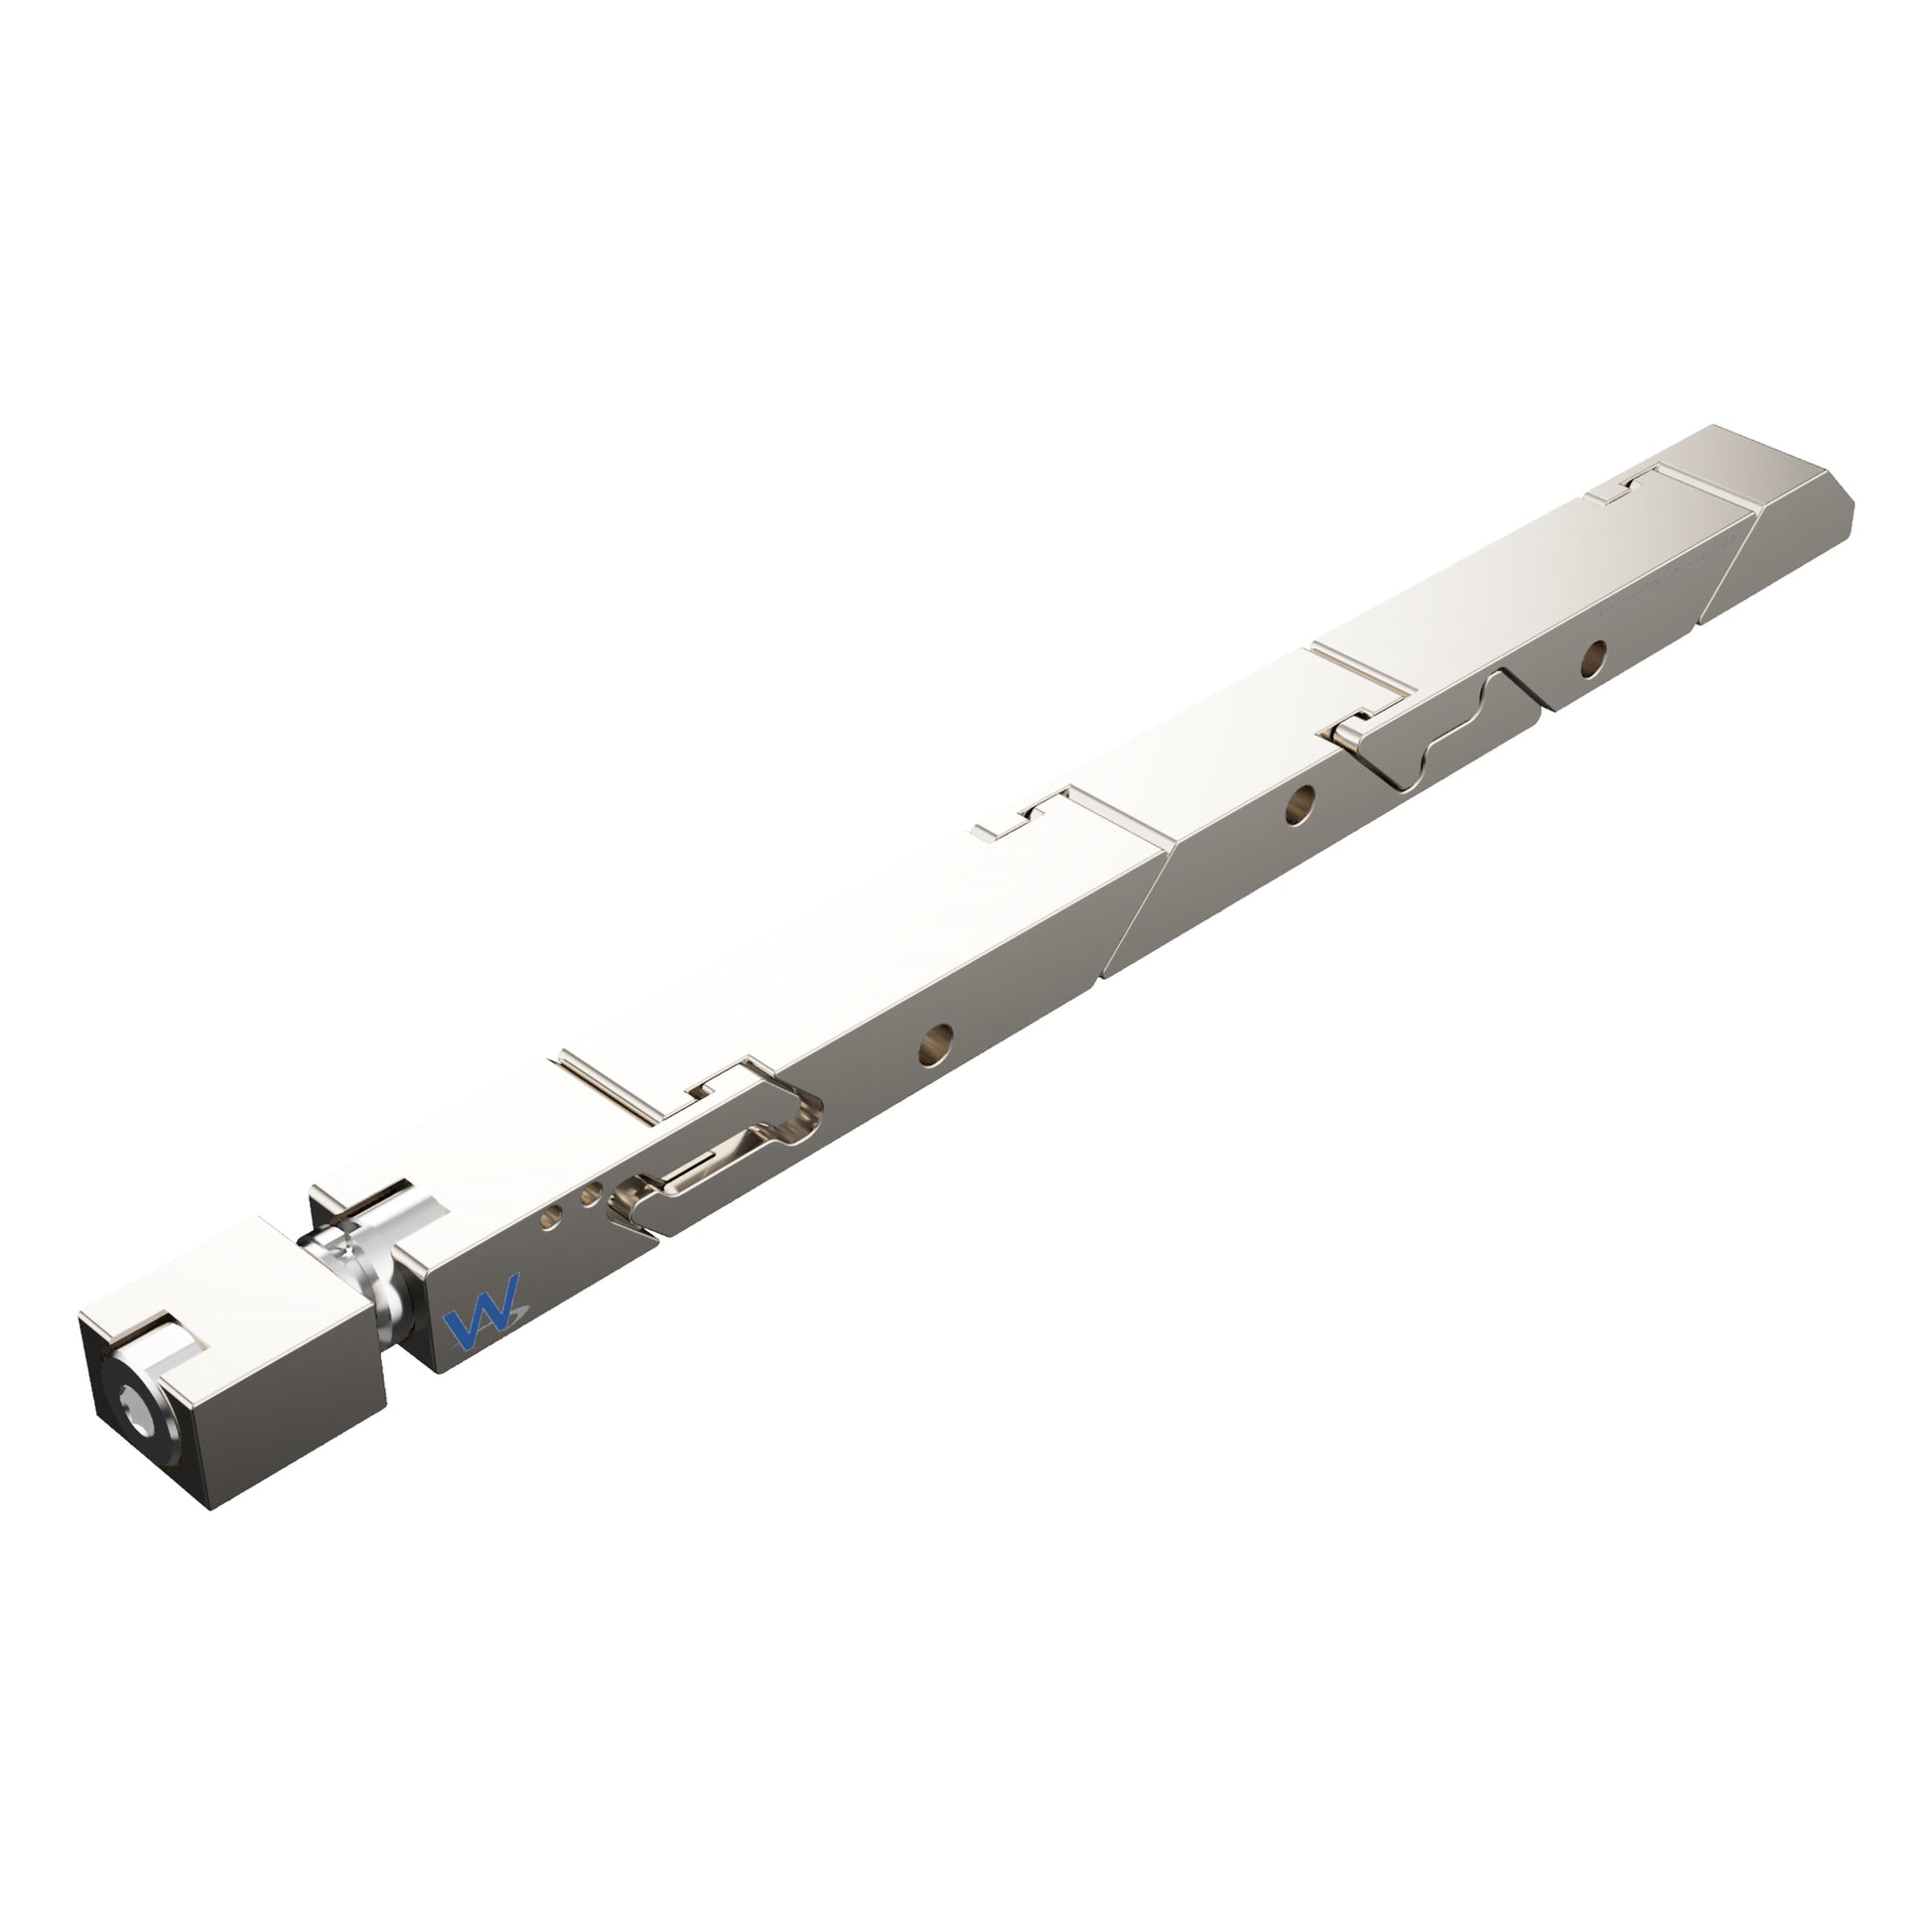 SW5-475-260-365 High Force Wedgelock, segmented long rectulangular hardware component, Electroless Nickel Plated